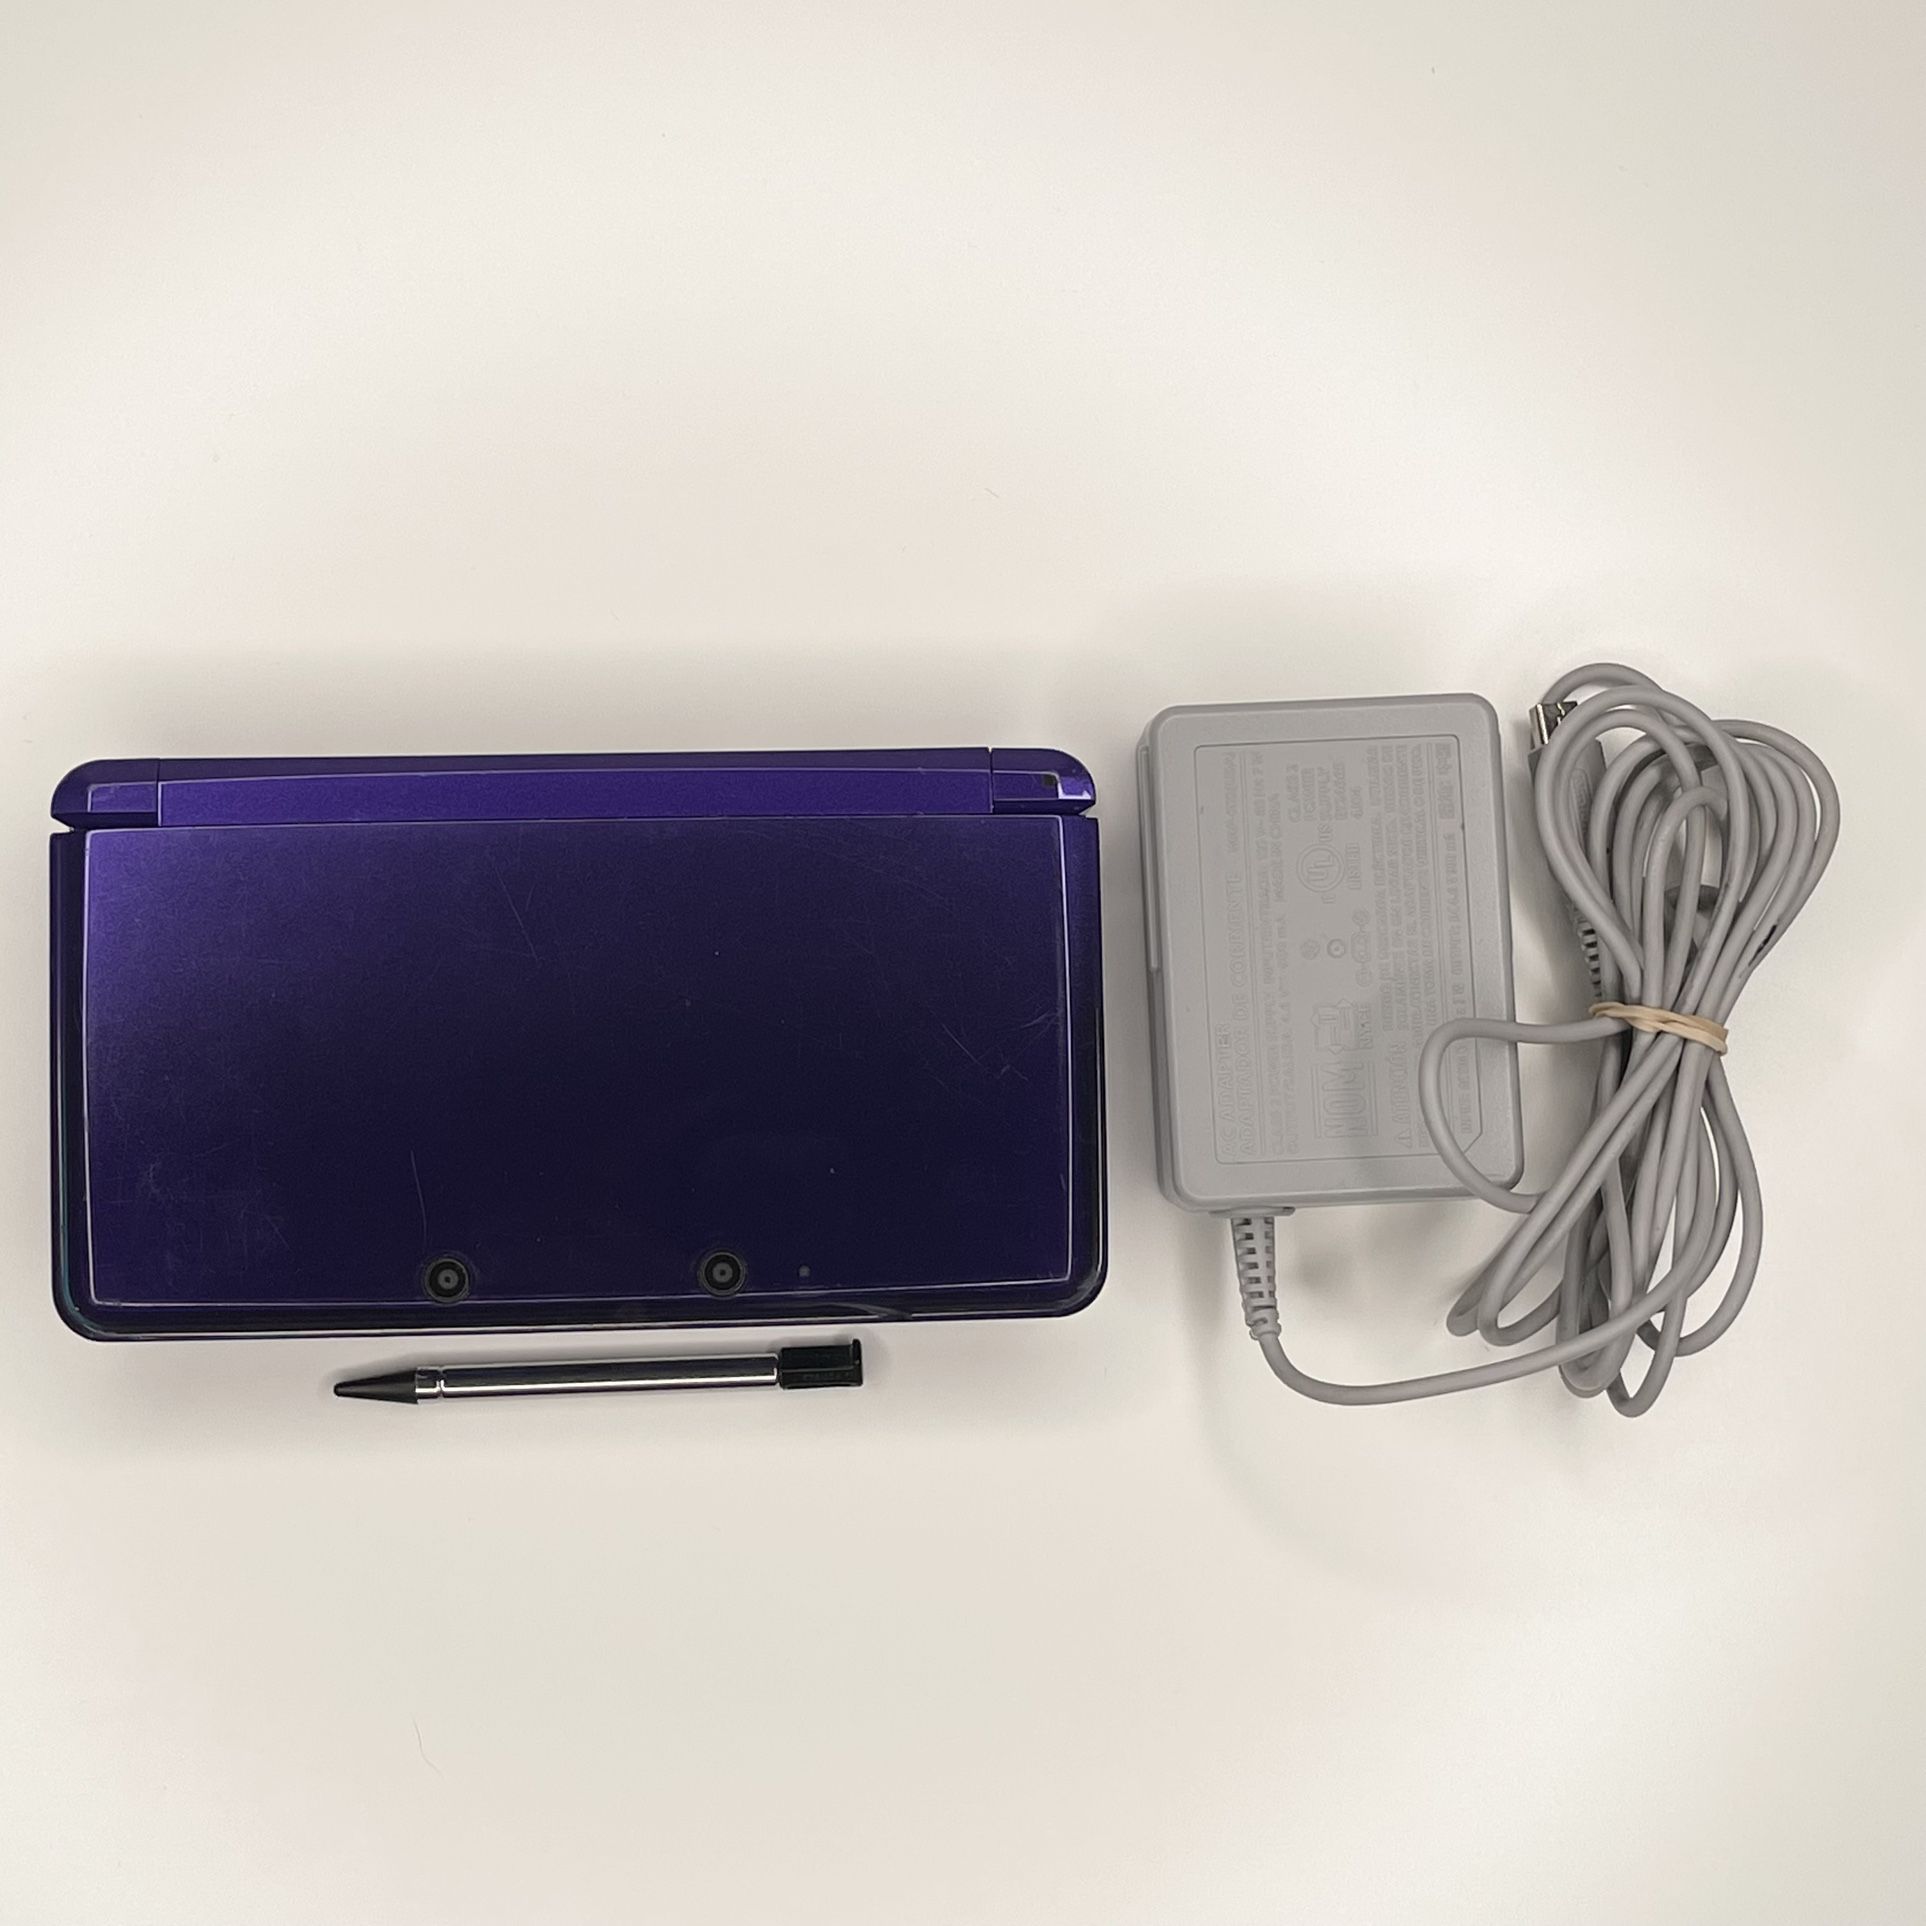 Nintendo 3ds Midnight Purple w/ Charger